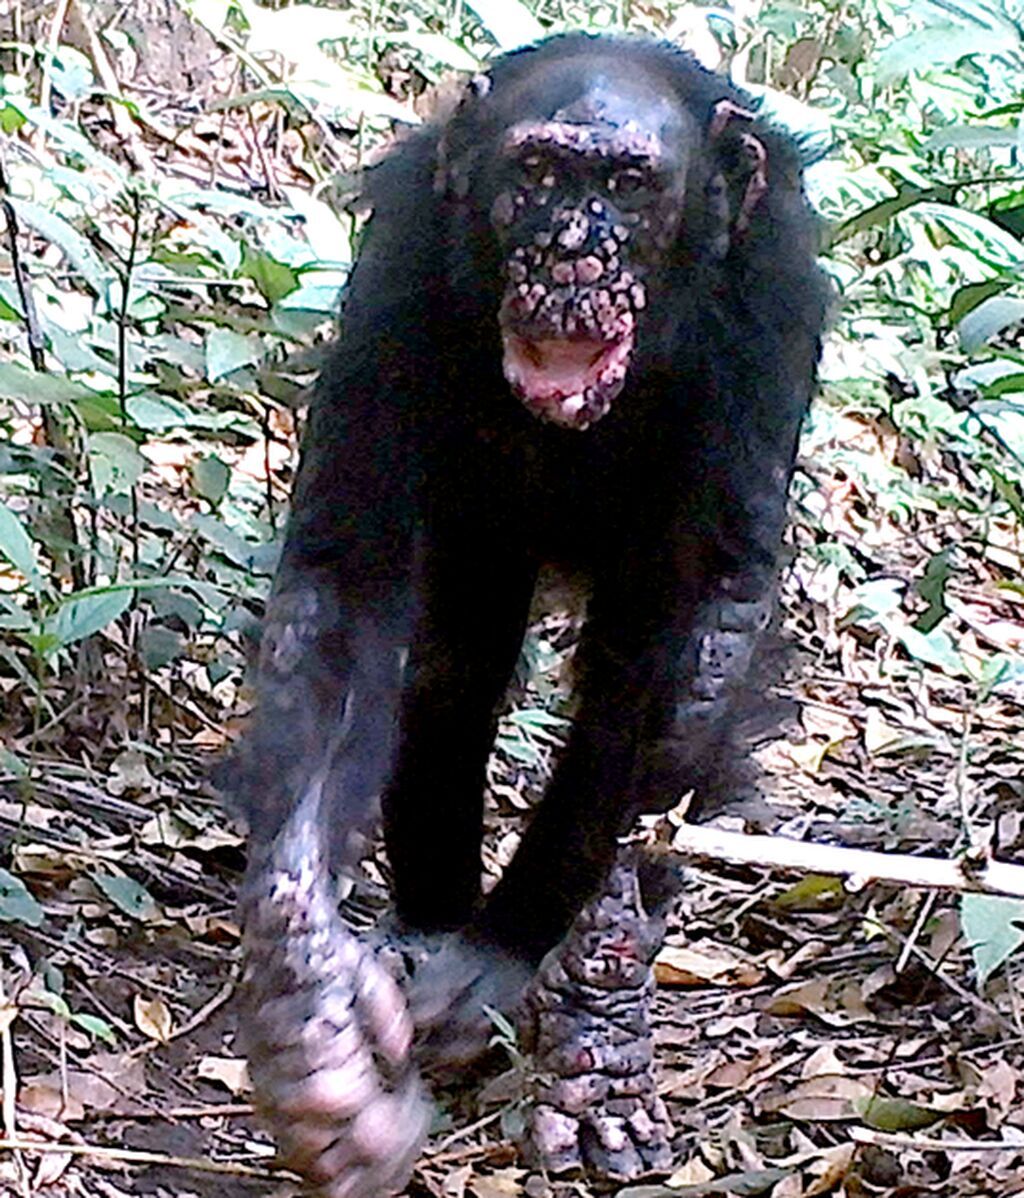 Low-Res_A chimpanzee named Brinkos with leprosy in Guinea-Bissau. Credit Cantanhez Chimpanzee Project, Elena Bersacola, Marina Ramon (1).png